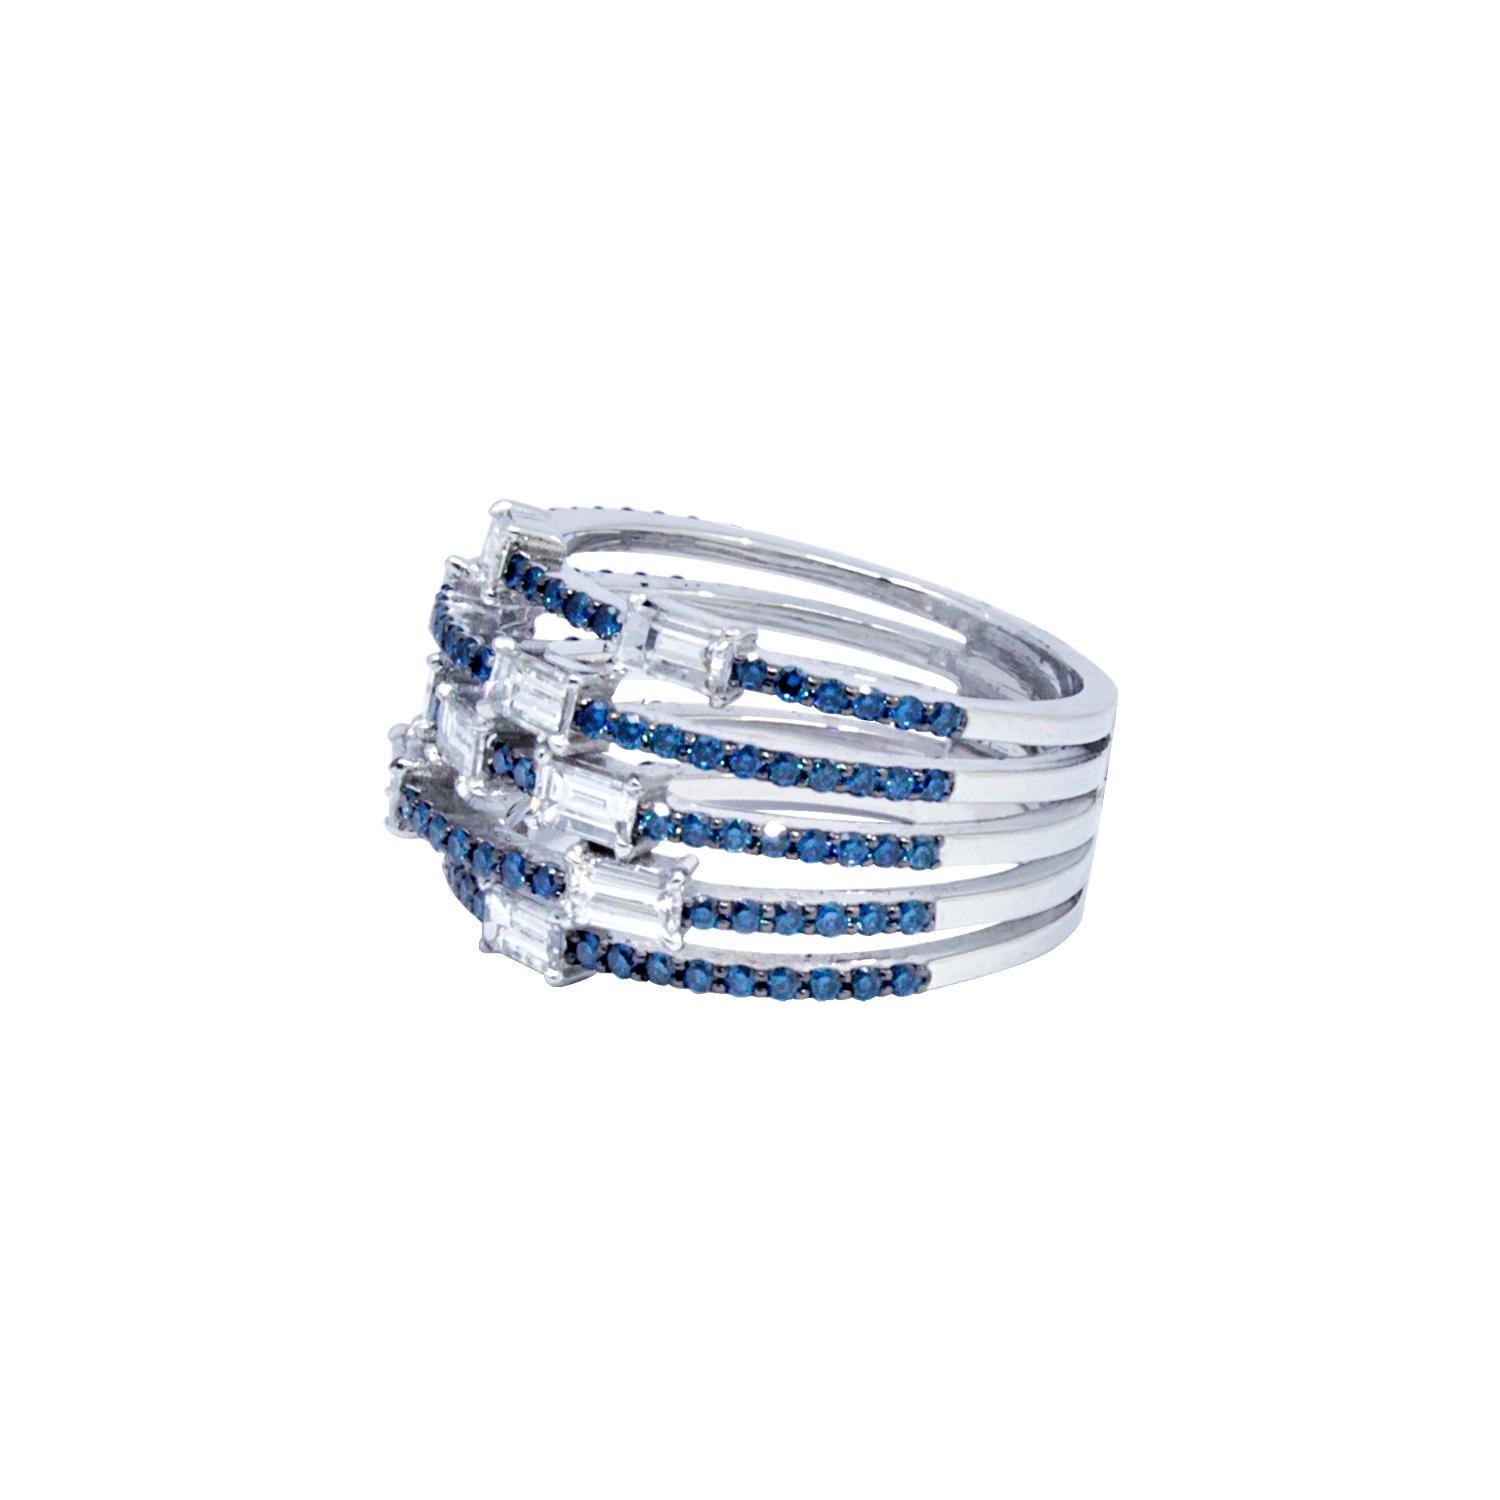 White Baguette Cut Diamonds, total carat weight – 1.29ct ‘F’ Colour ‘VVS1’ Clarity
Brilliant cut blue diamonds total carat weight - 0.65ct

The House of Poniros is a luxury brand synonymous with quality and style. The famous Greek brand has